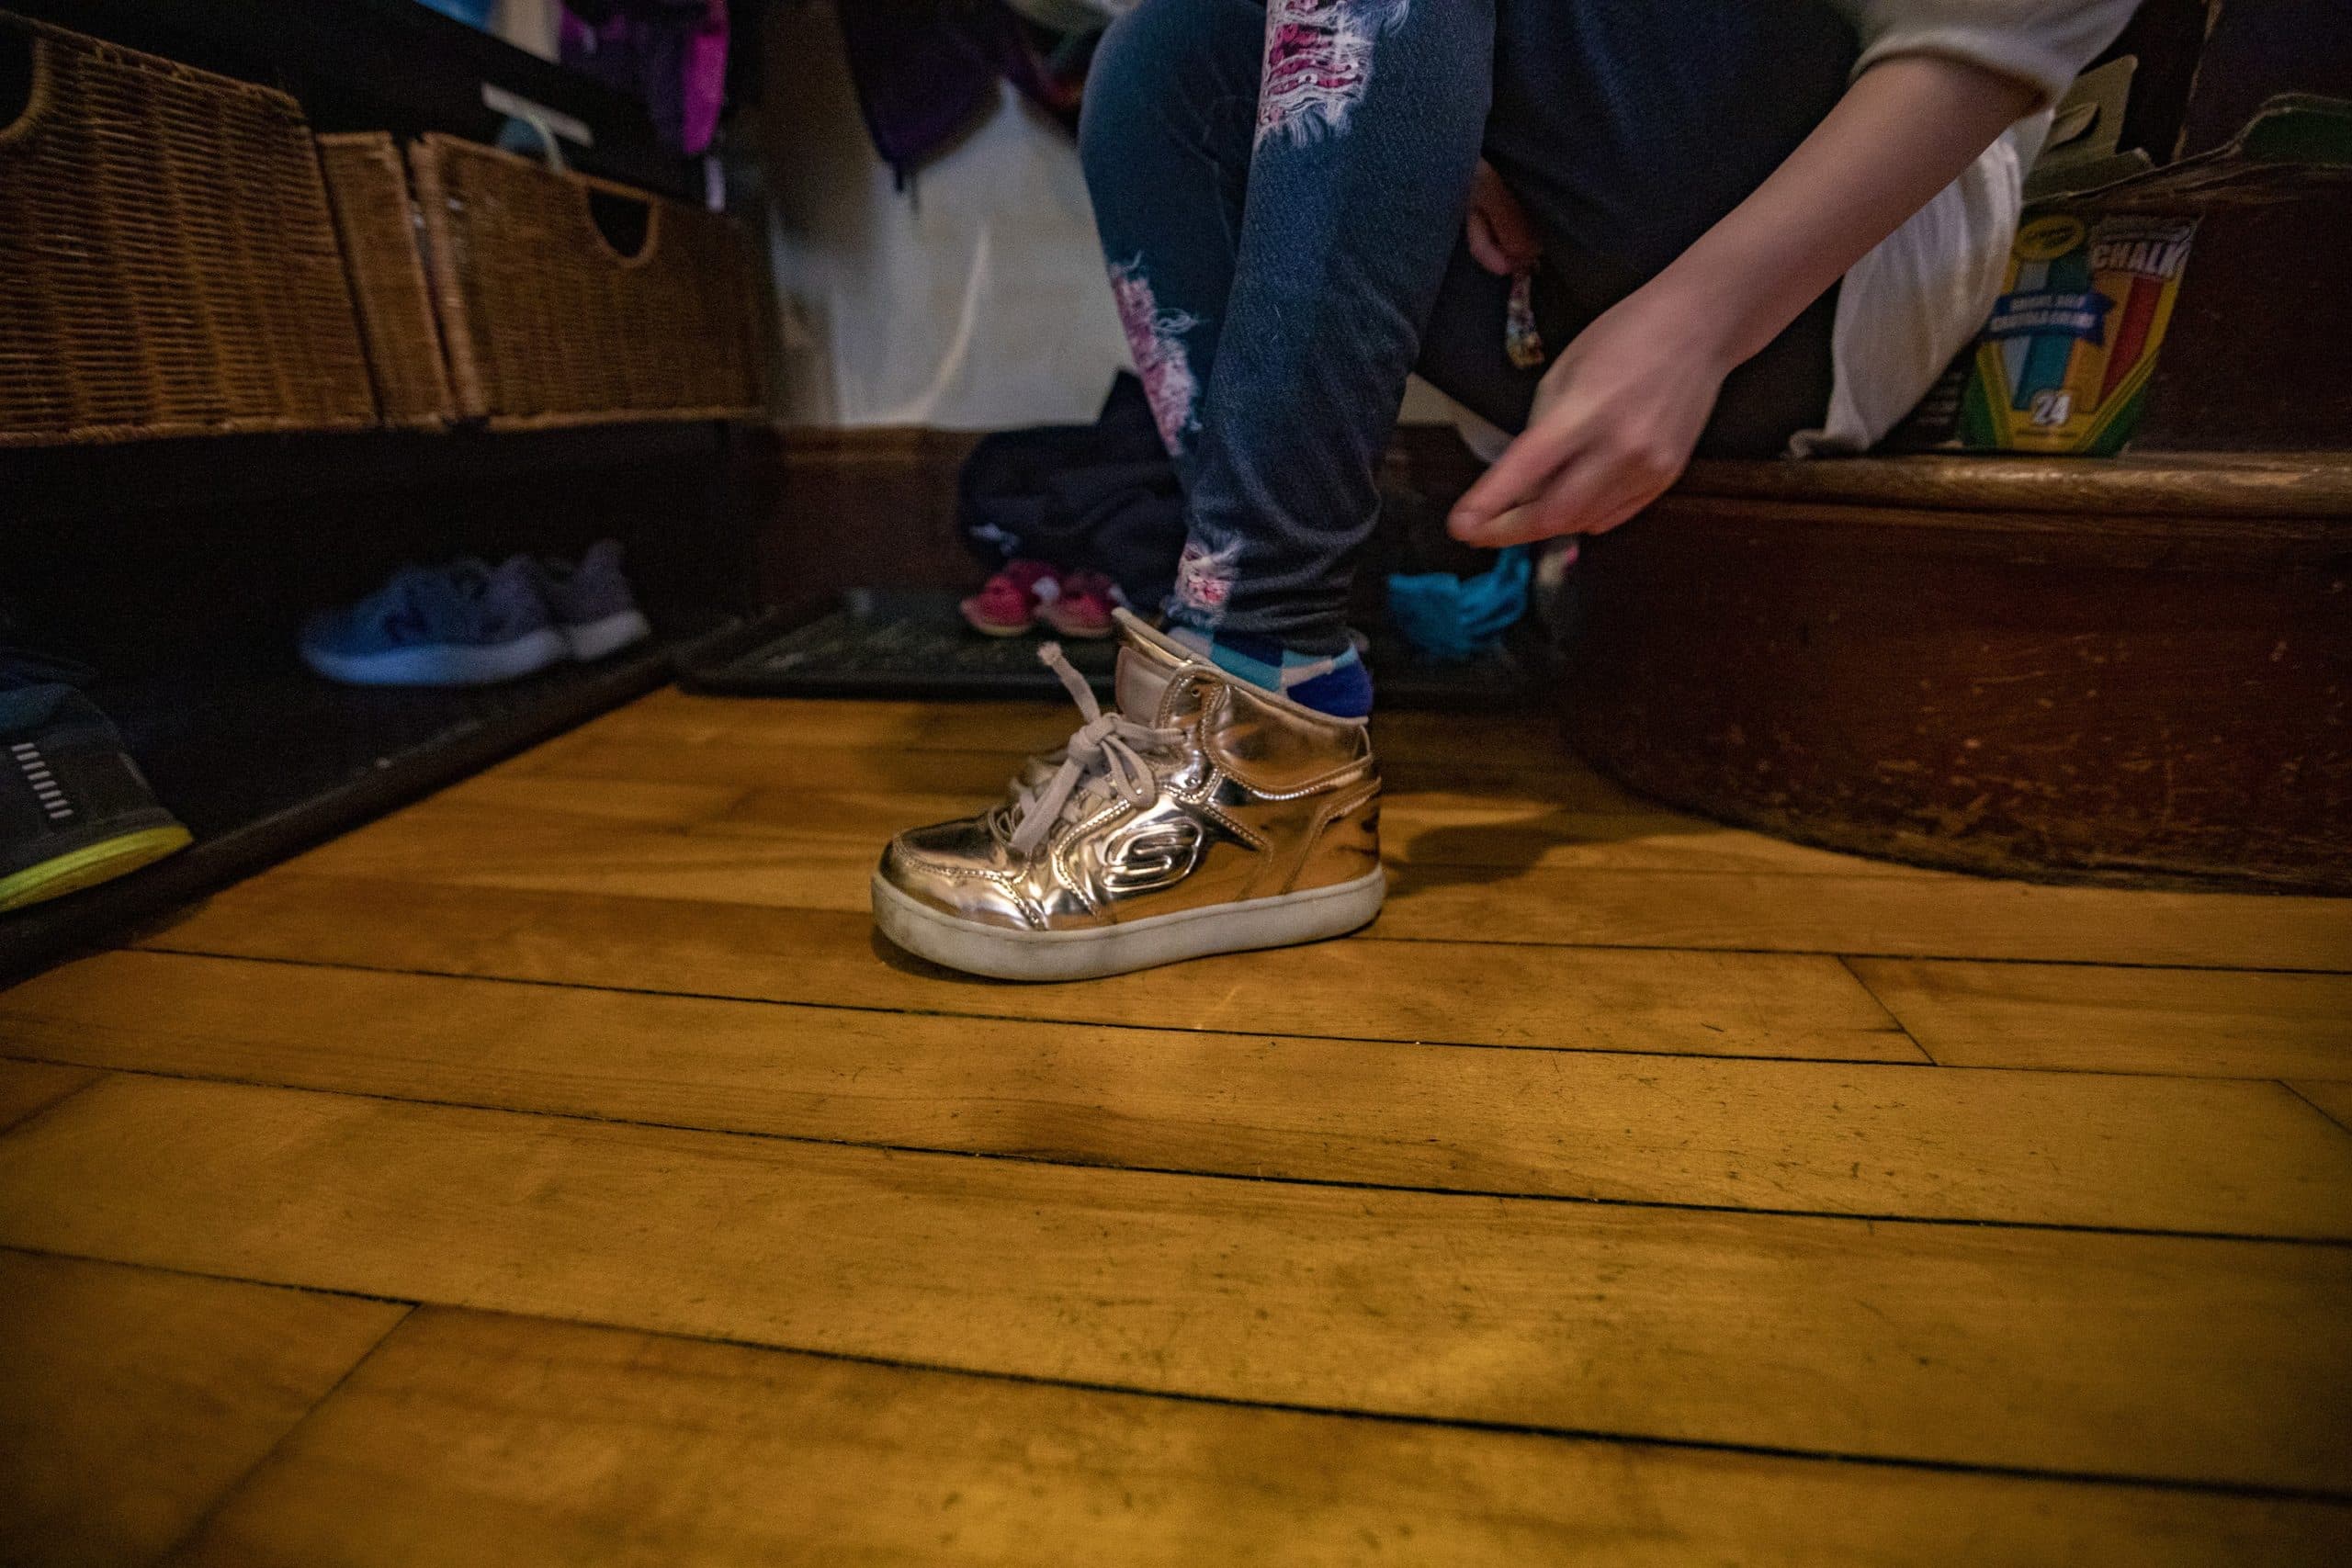 Hallel puts on their gold sneakers to go to the playground with the family. (Jesse Costa/WBUR)